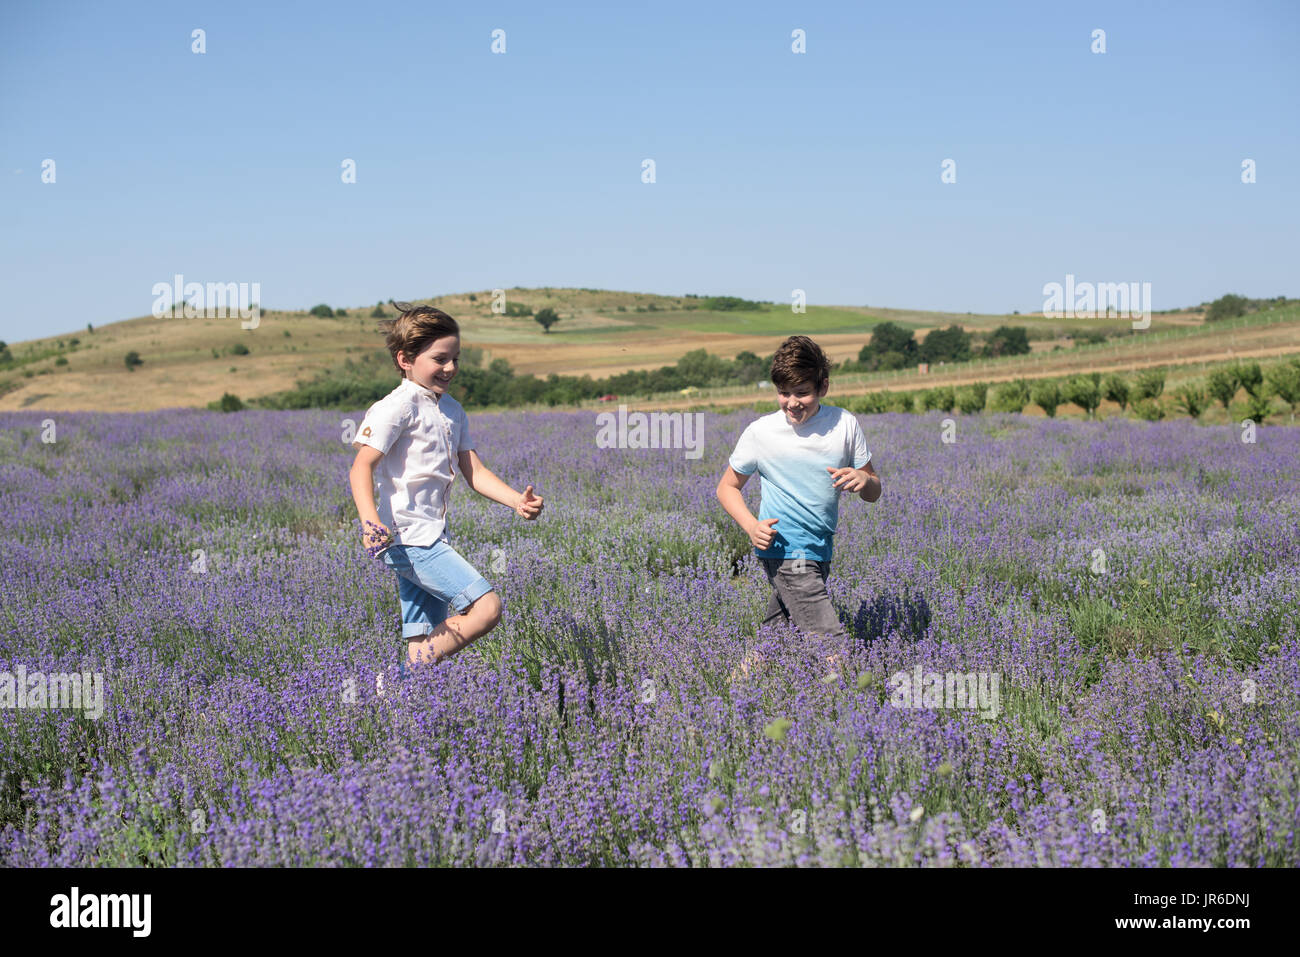 Two boys running through a lavender field Stock Photo